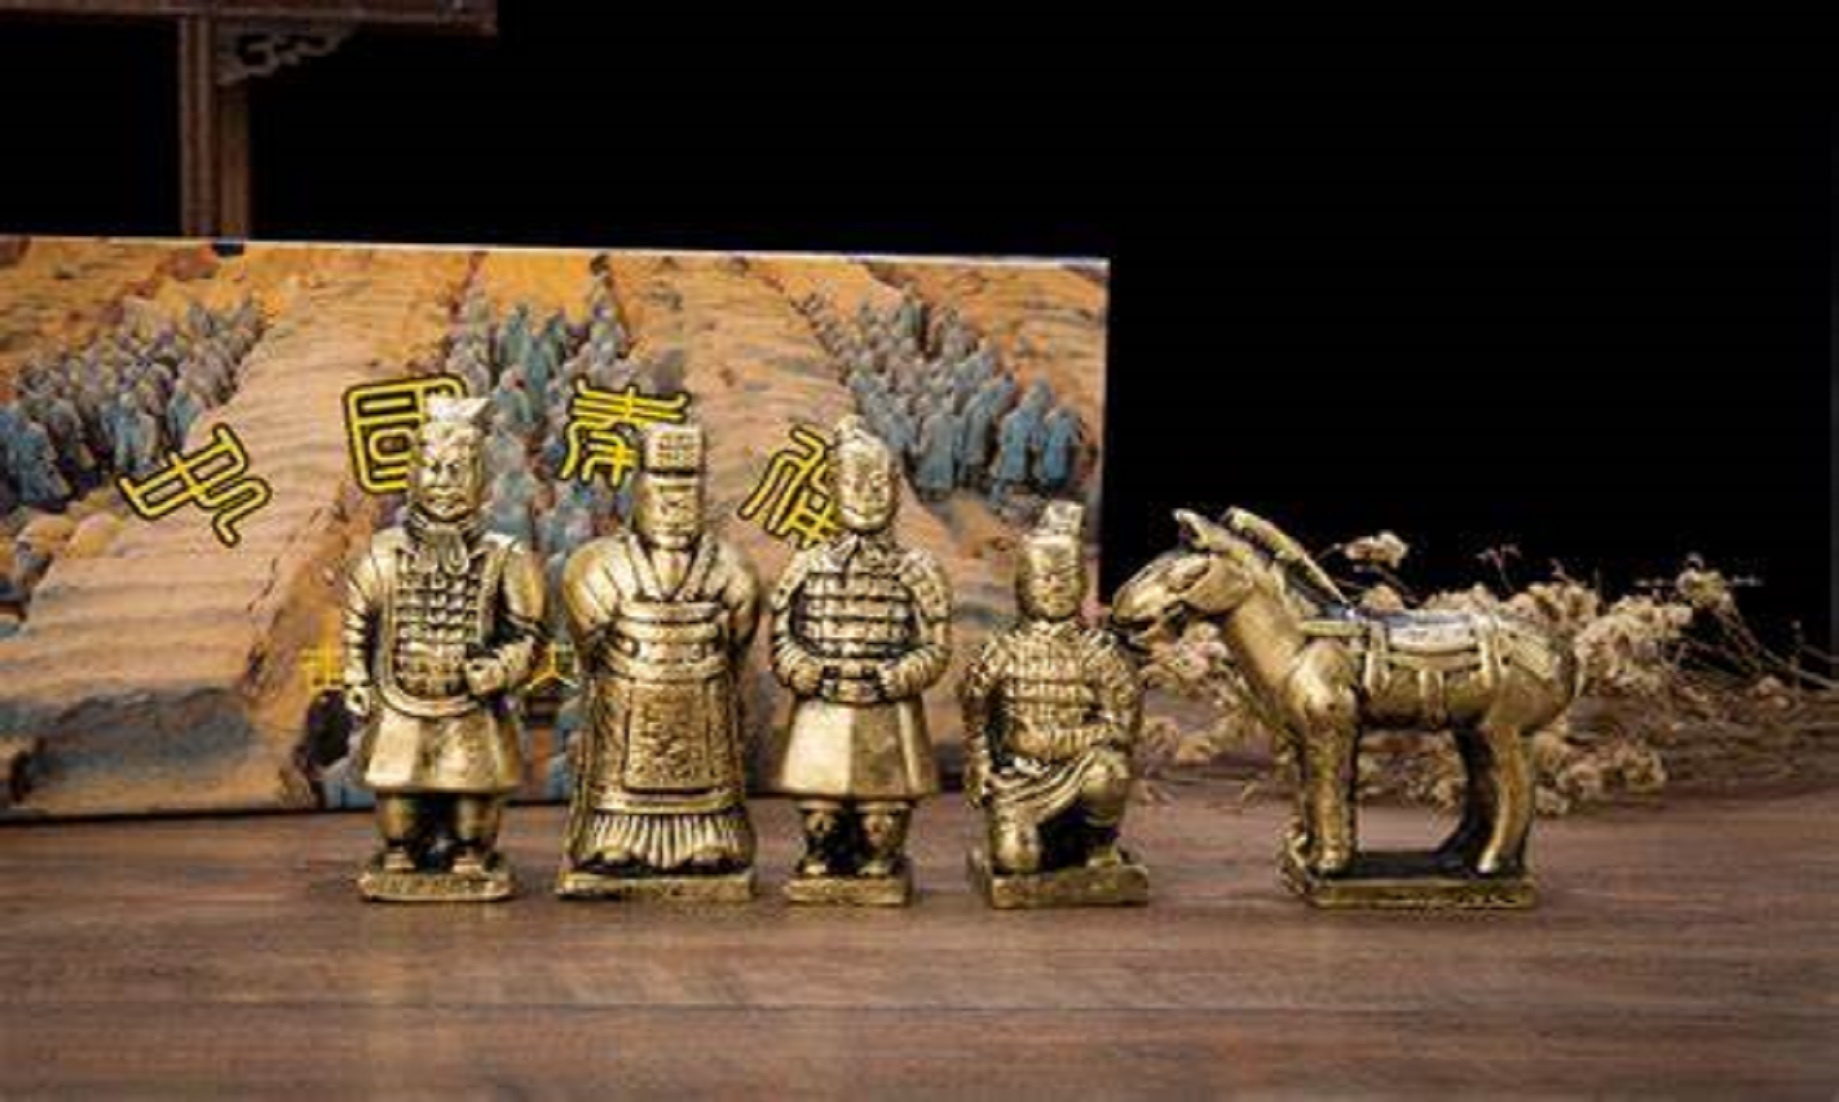 Metal Figurines Discovered In Chinese Museum Housing Terracotta Warriors